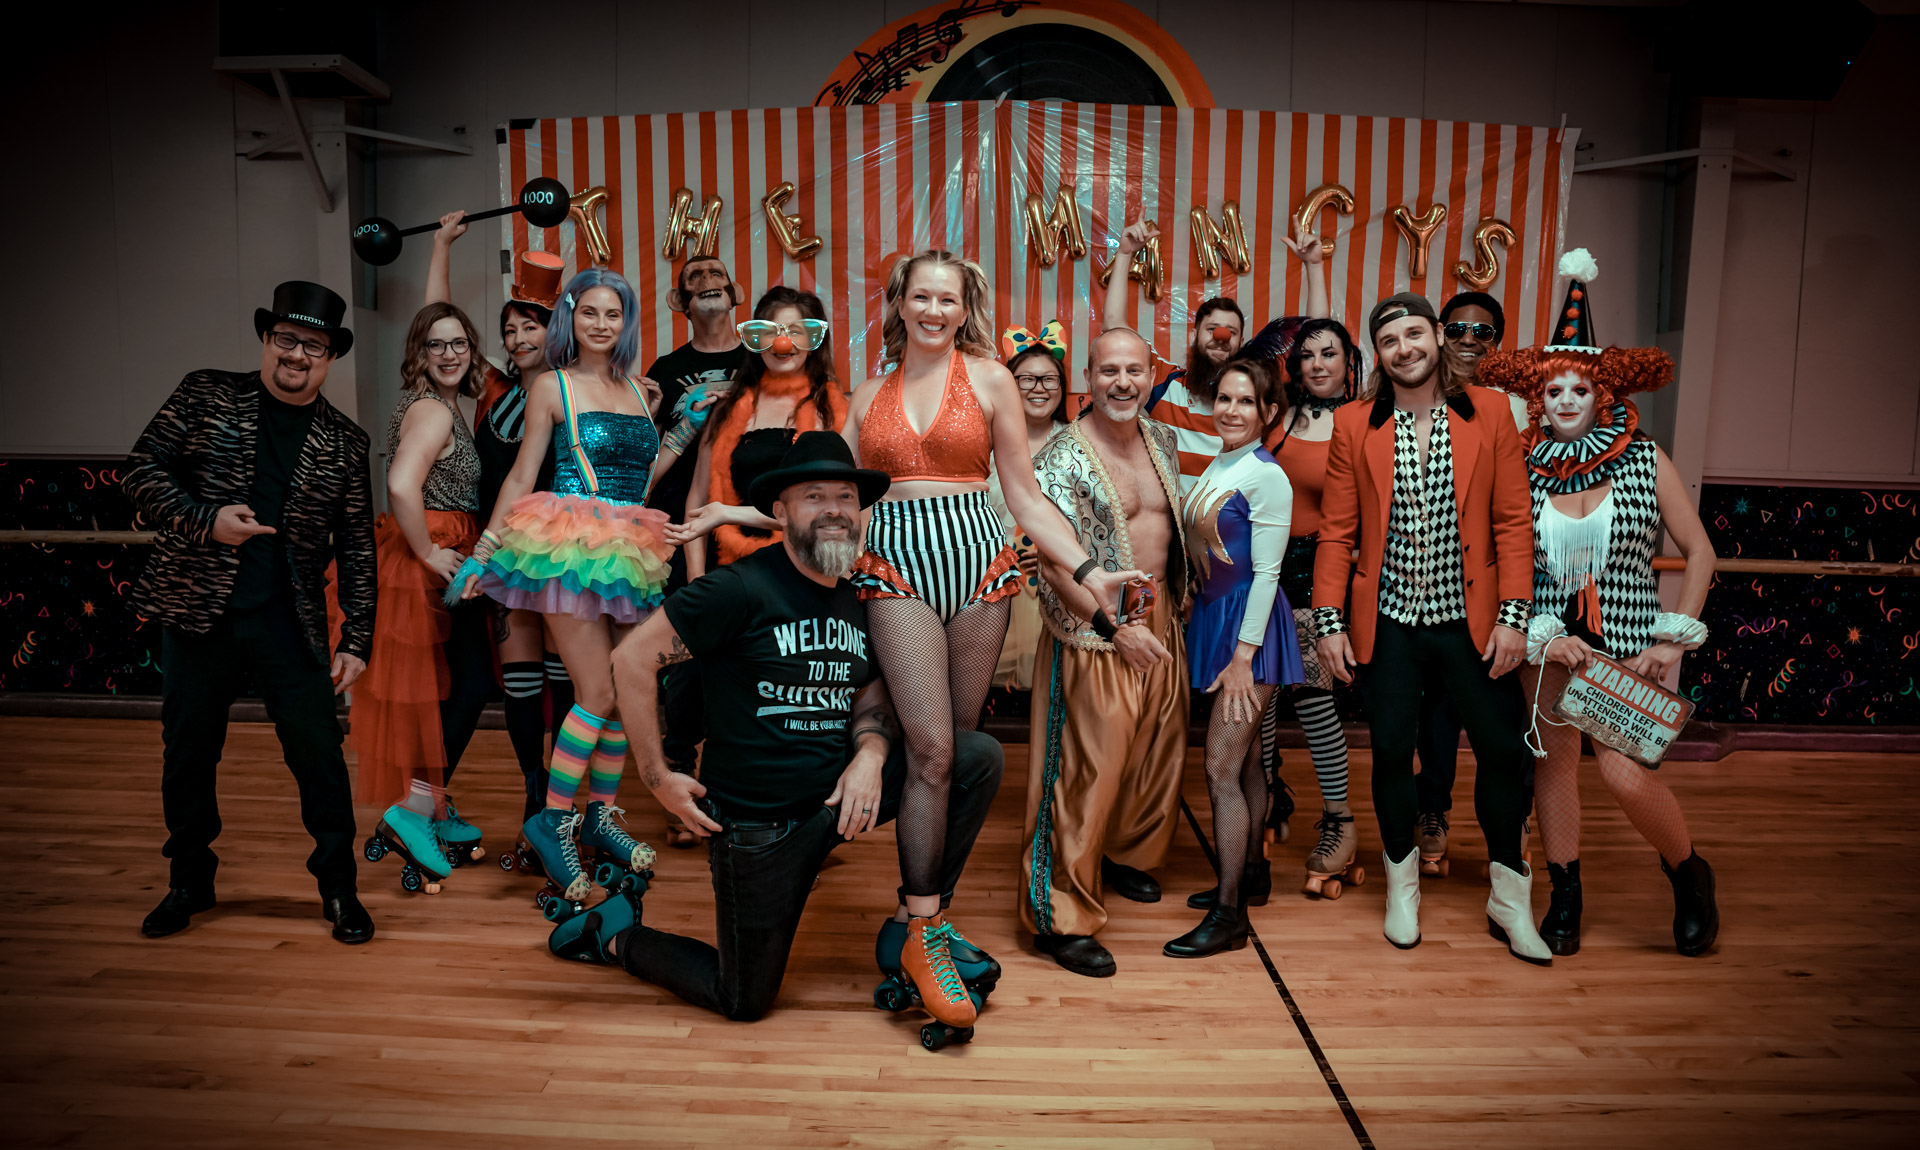 A group of people dressed in circus attire